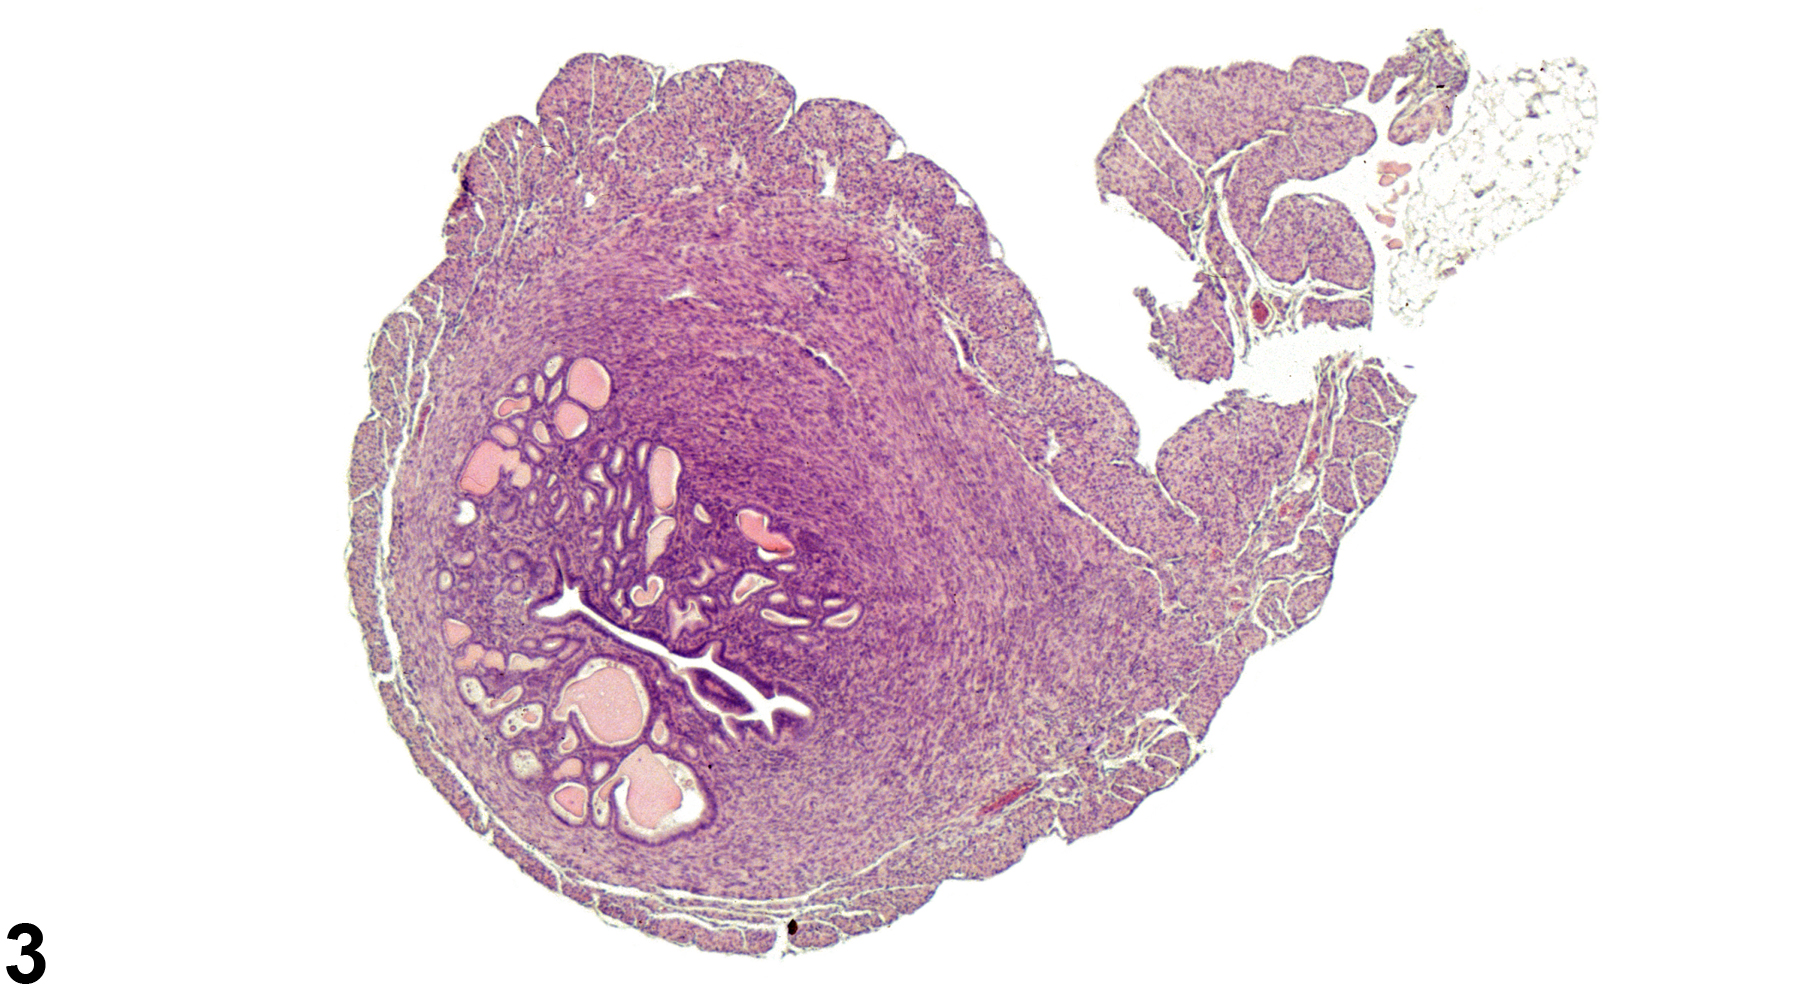 Image of hyperplasia, cystic (CEH) in the uterus from a female B6C3F1 mouse in a chronic study